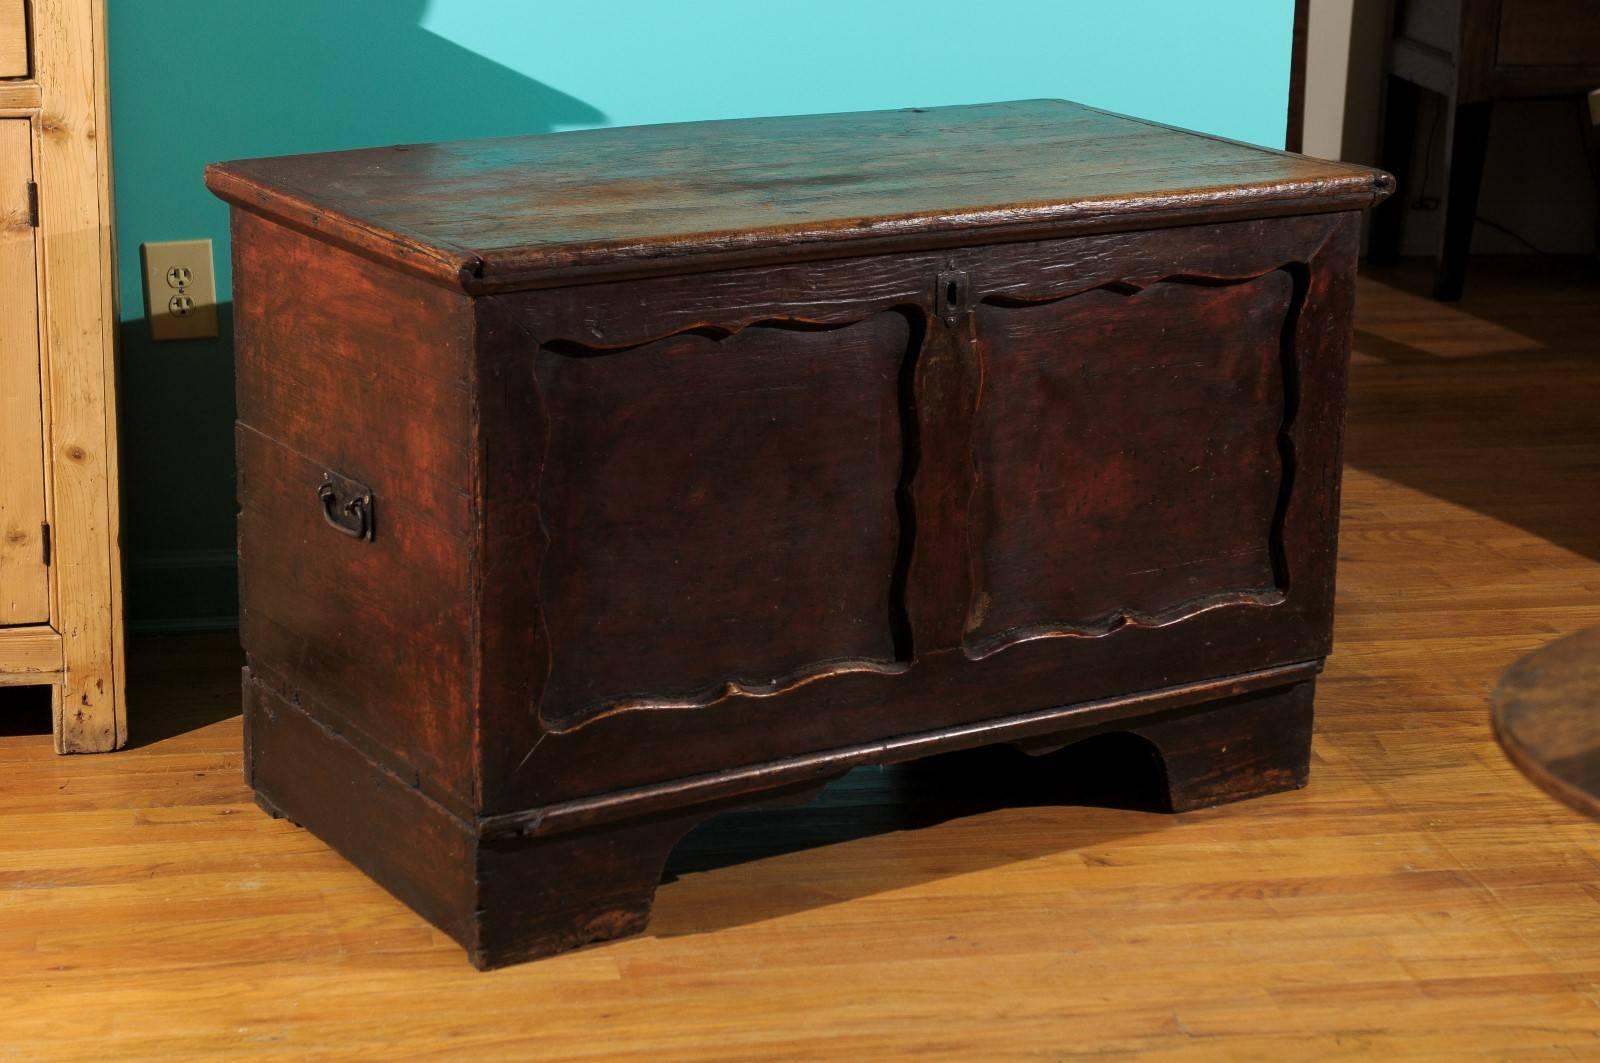 This English coffer has its original paint. The coffer is made of pine and is dovetailed down both sides. Old iron strap hinges run down the back of the chest.